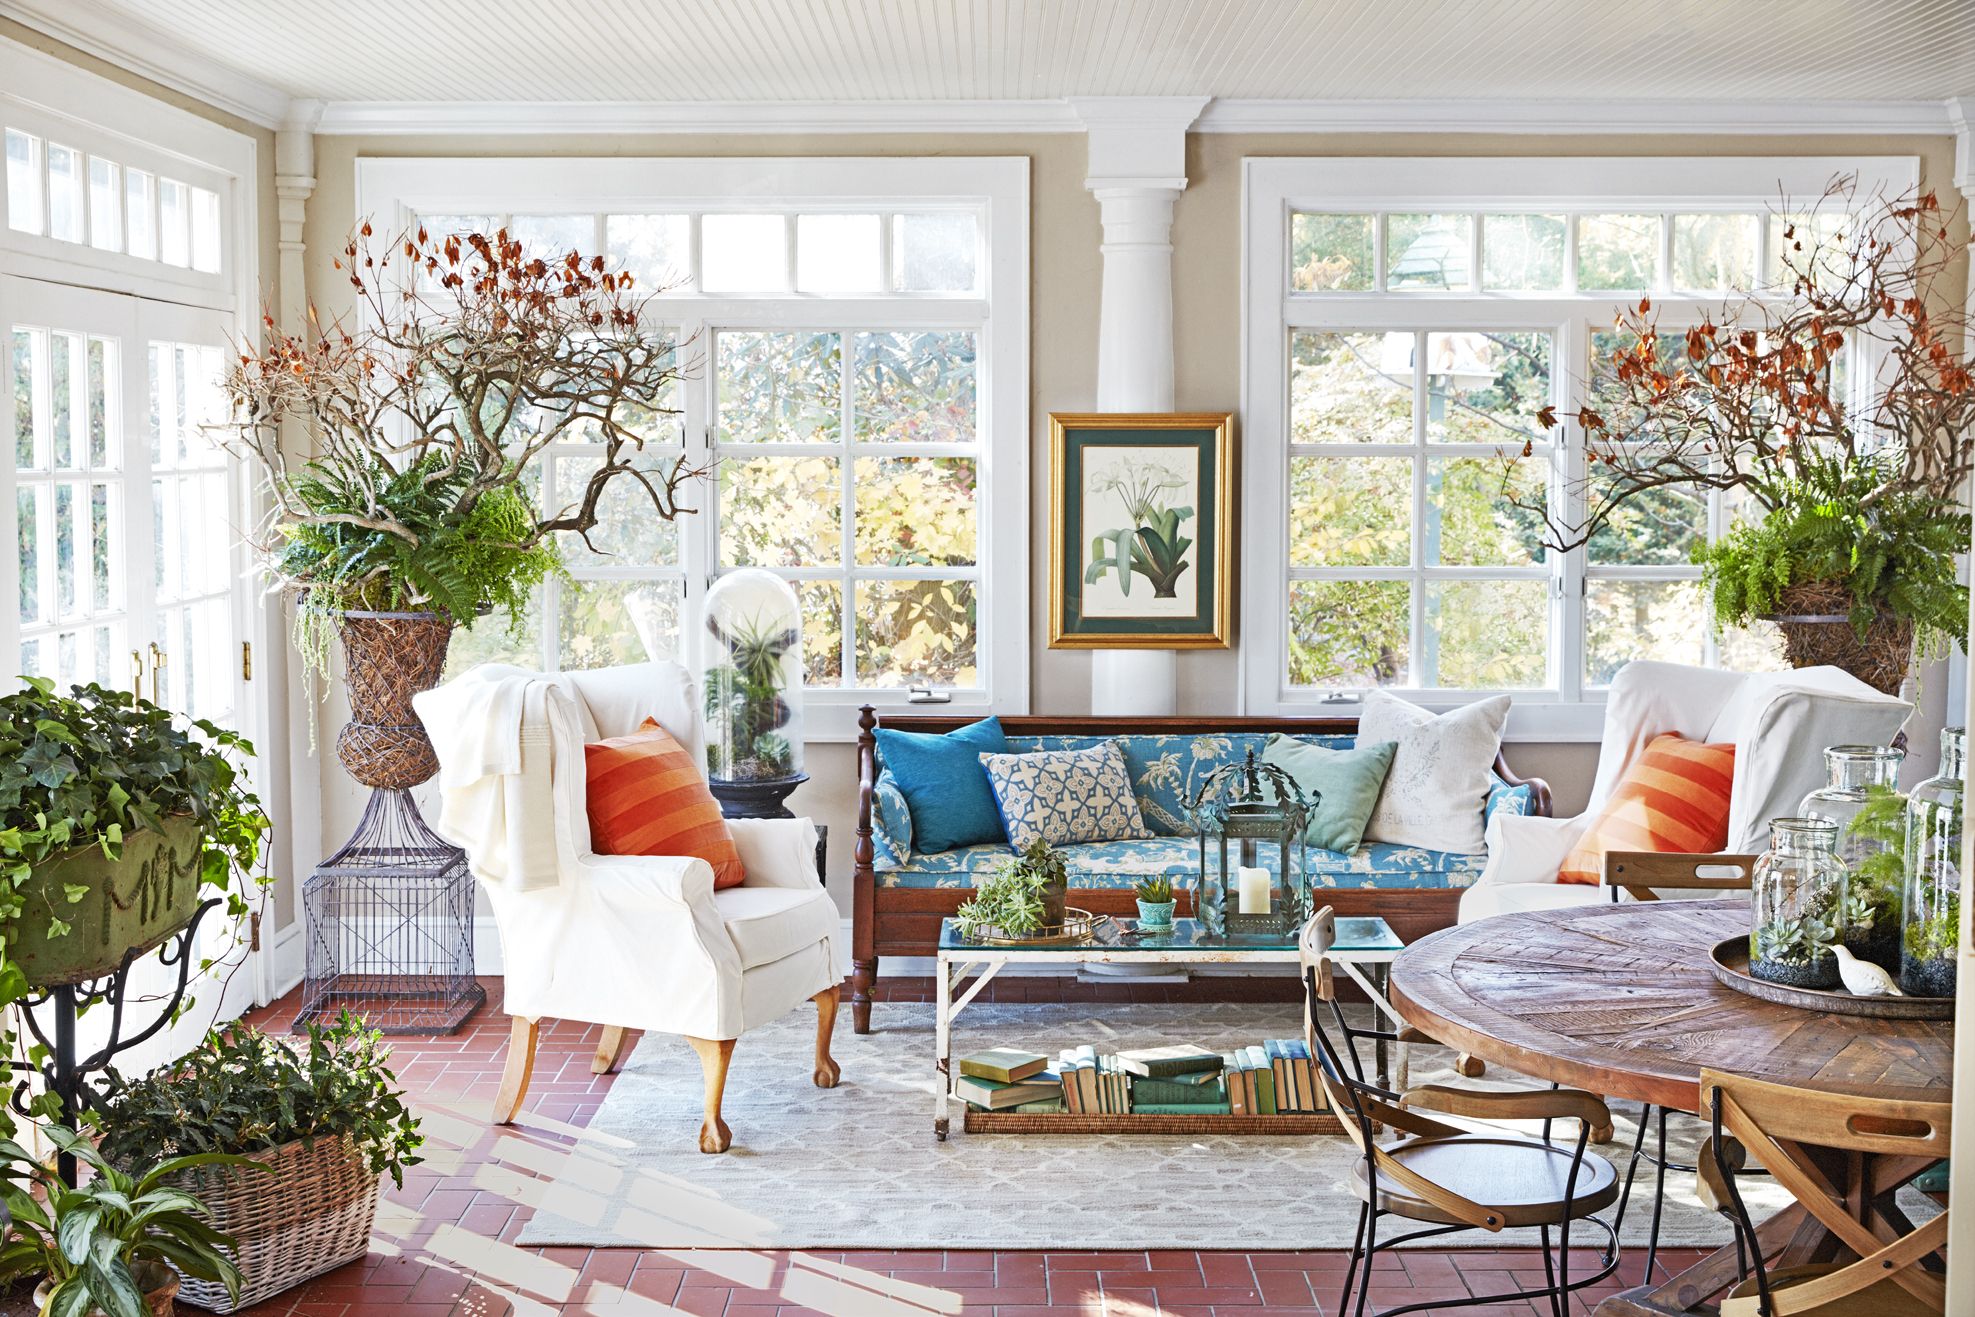 How to Decorate a Sunroom With Plants